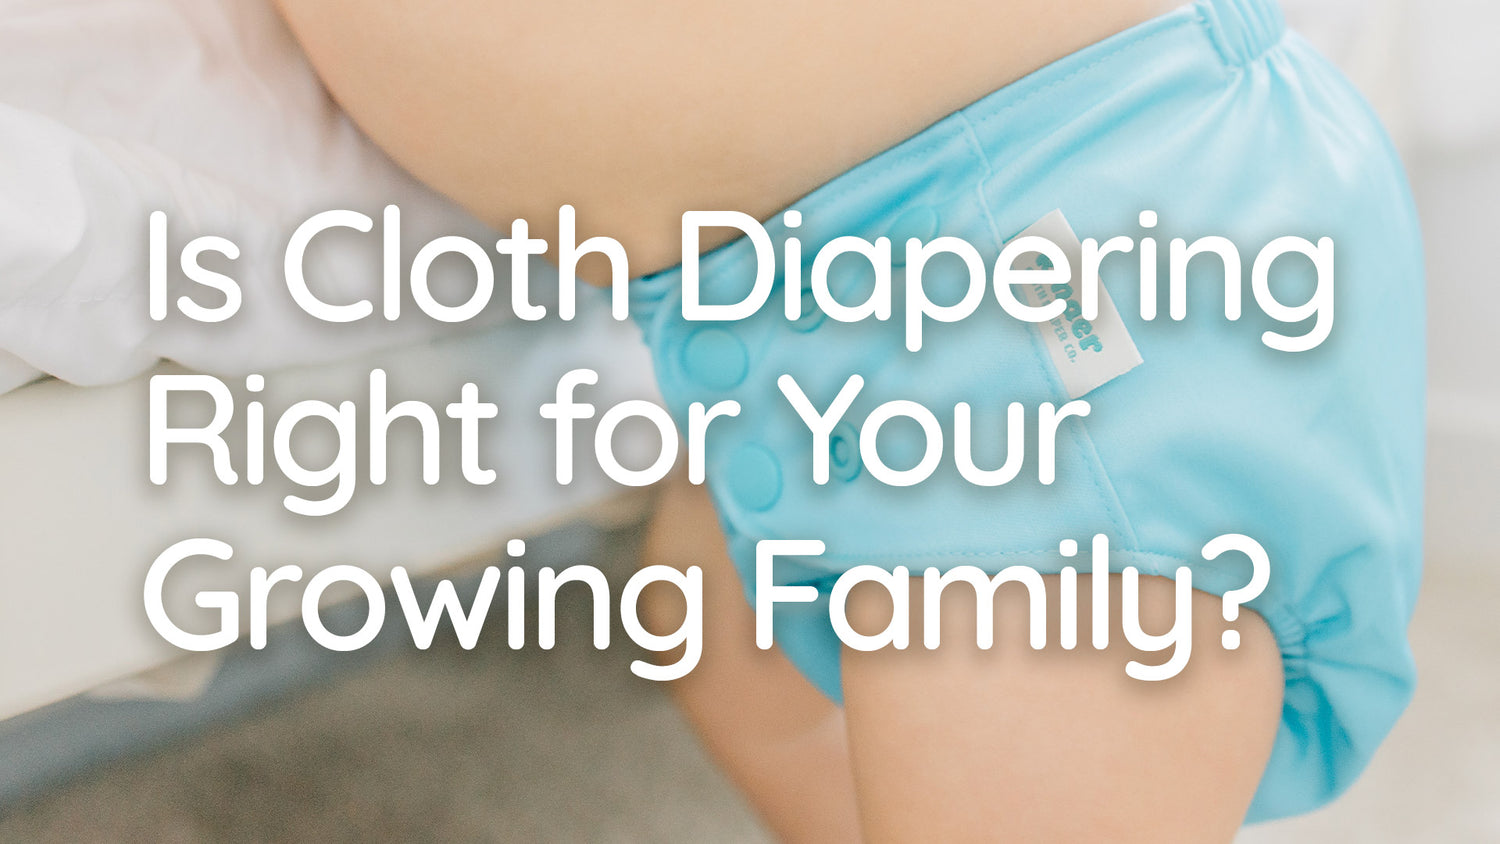 Are cloth diapers right for your family's lifestyle? Weight the pros and cons